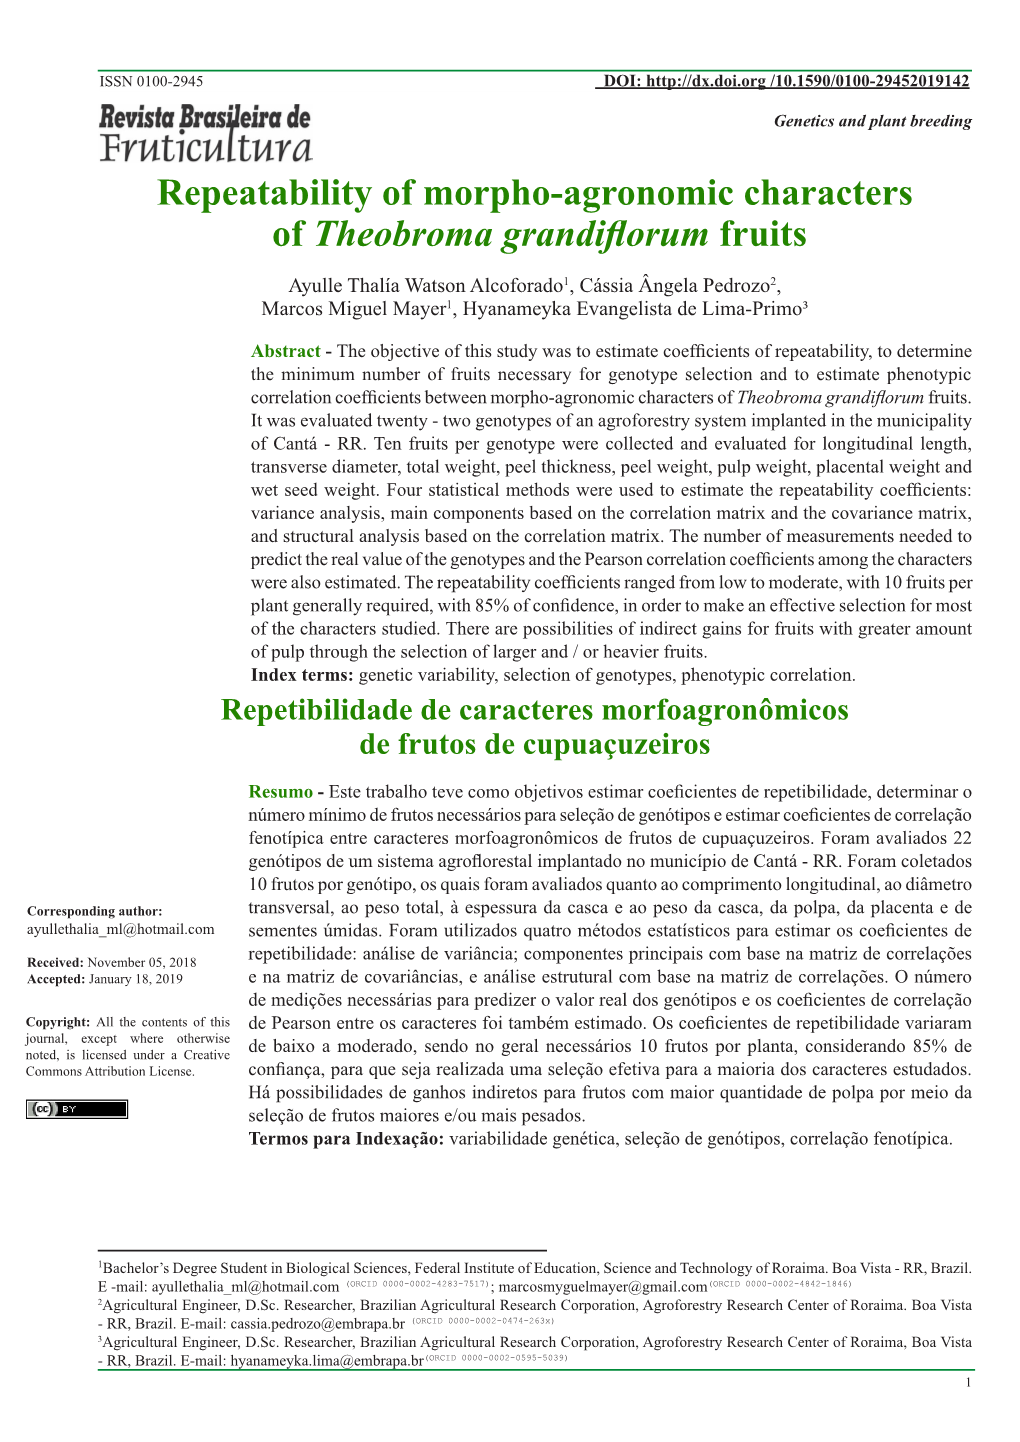 Repeatability of Morpho-Agronomic Characters Of